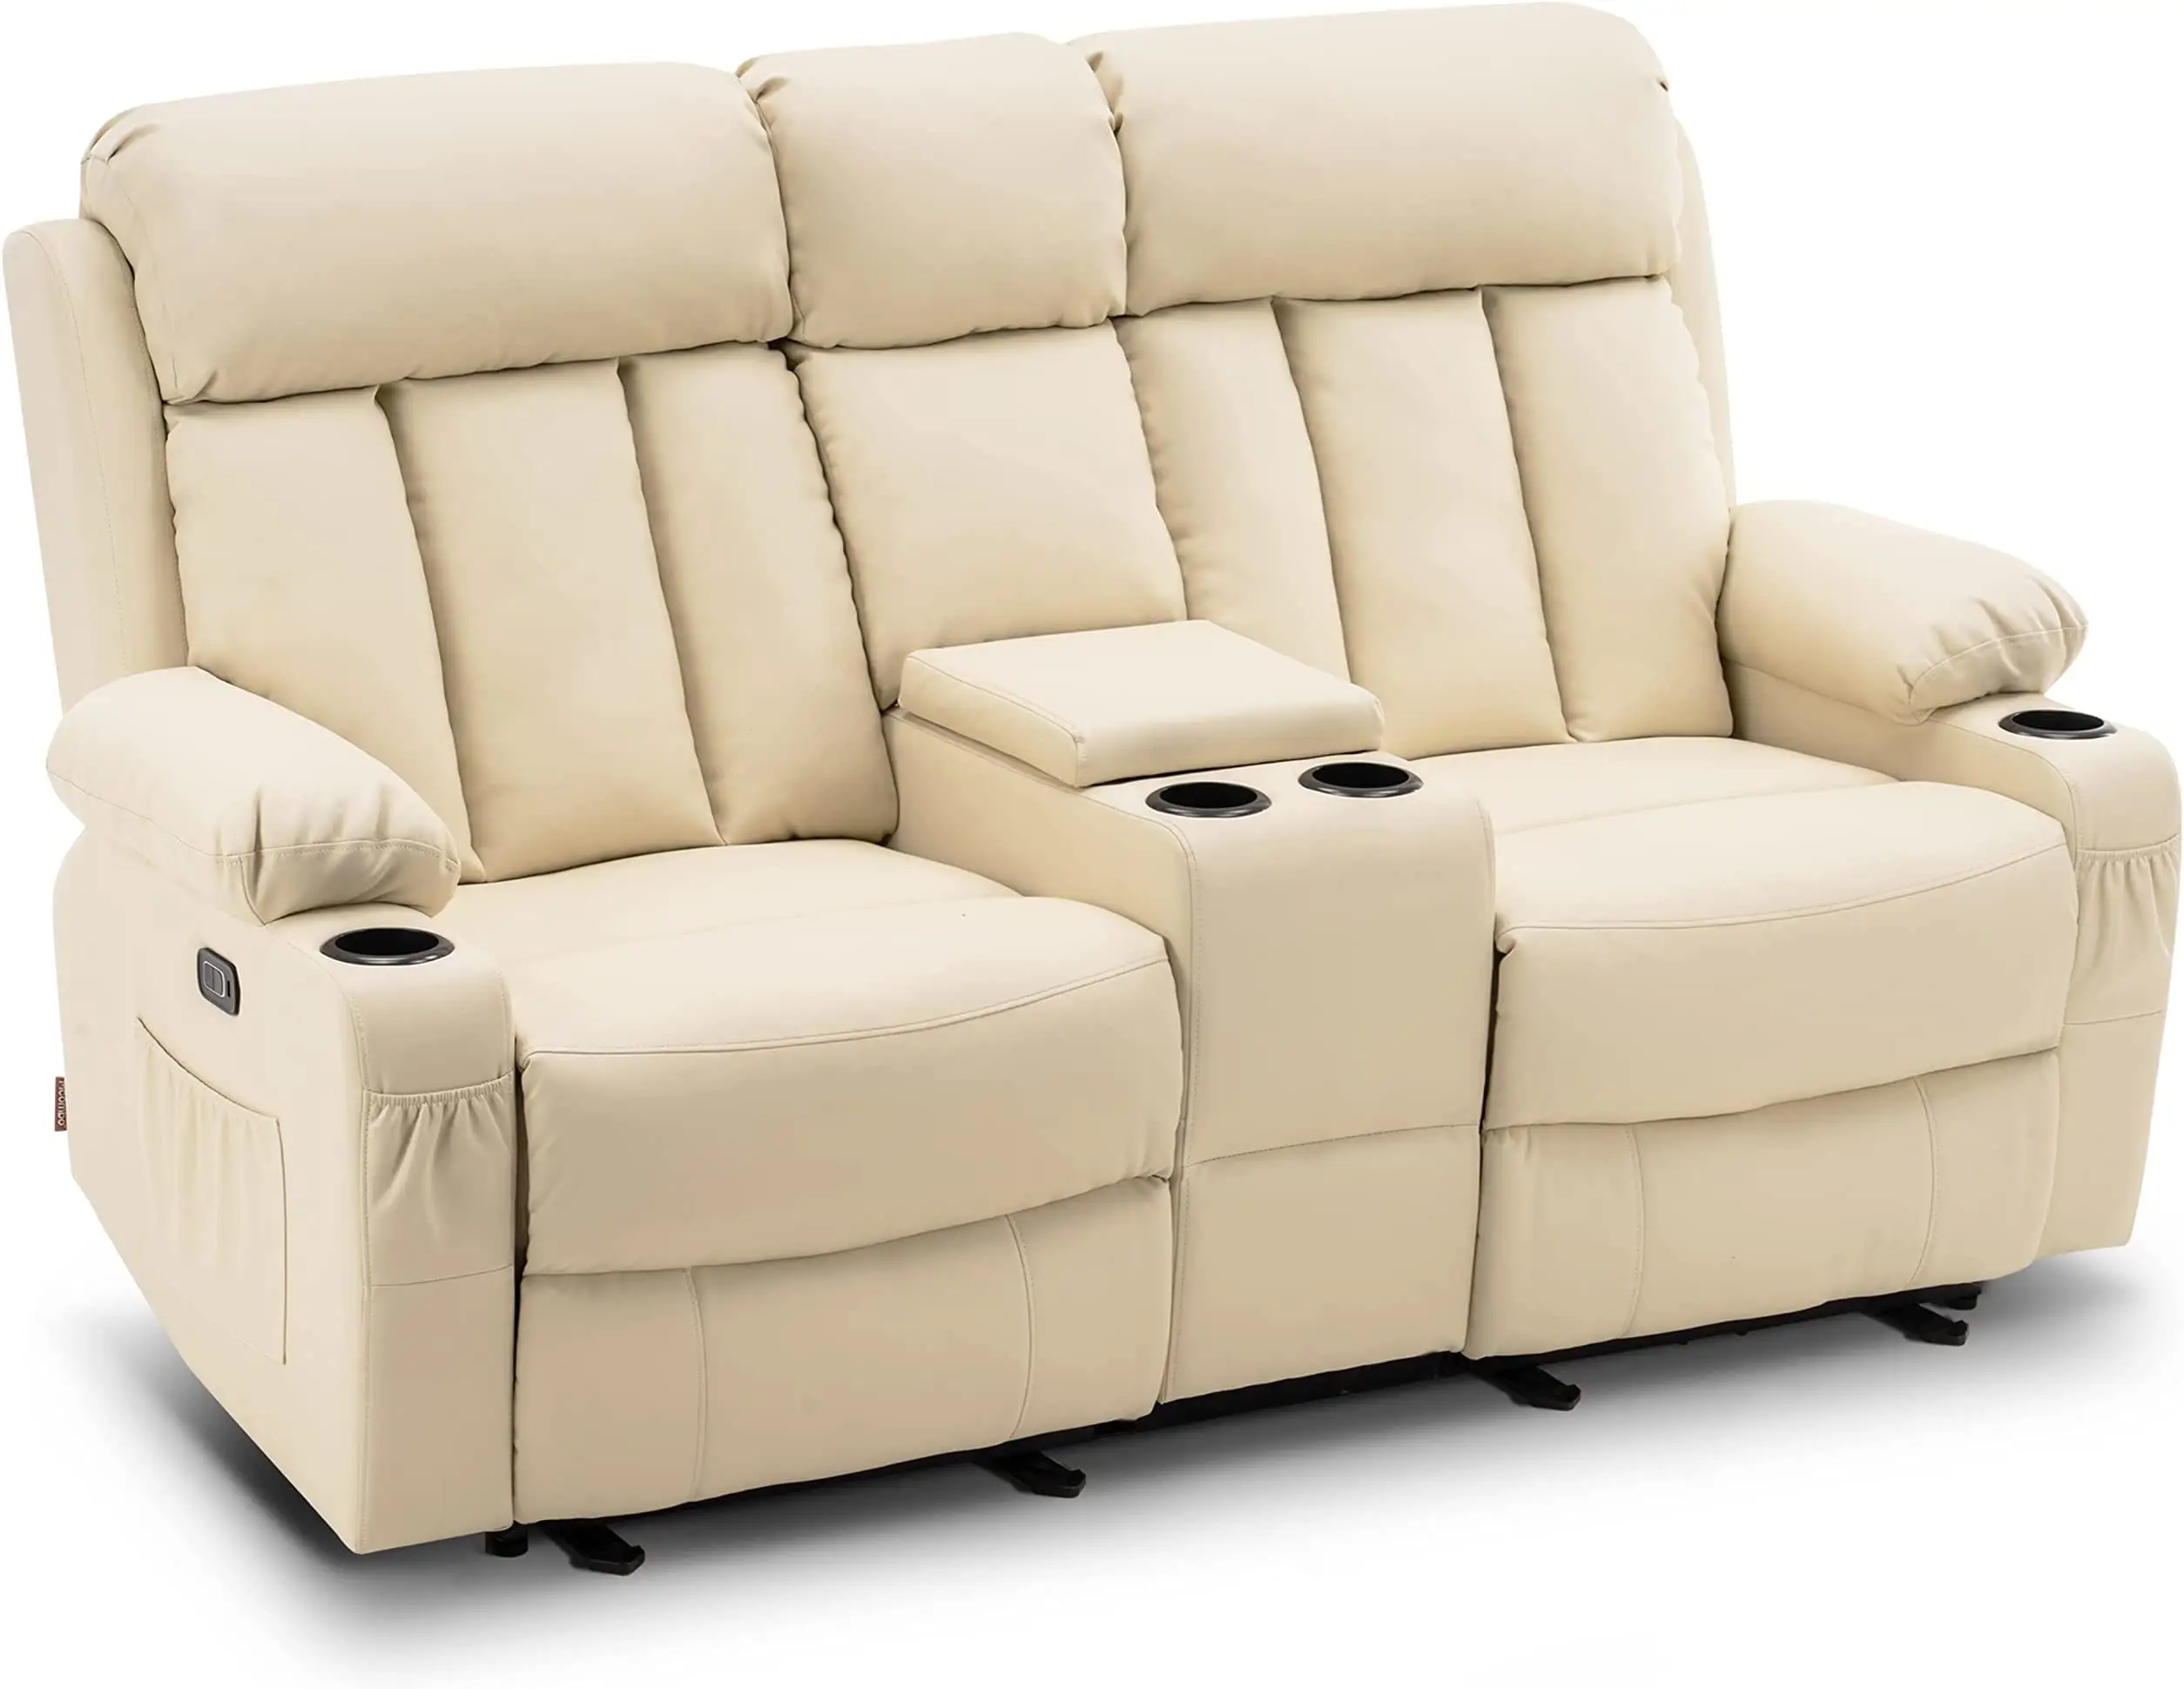 Multi-functional fabric sofa living room Small flat straight cream air three-seat electric first class space capsule